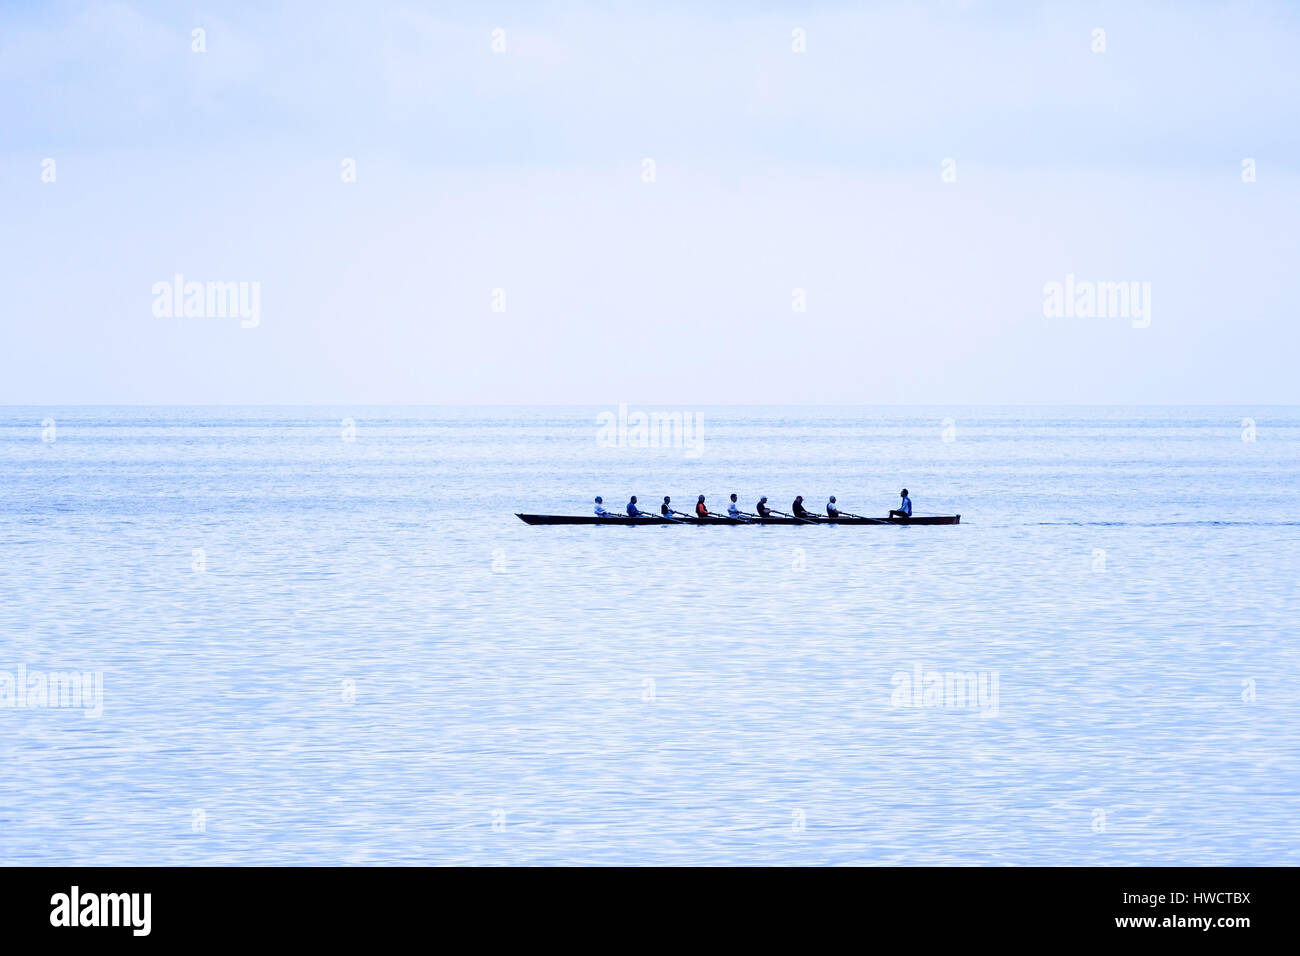 An oar boat with eight rowers and coxswain by the sea, Ein Ruderboot mit acht Ruderern und Steuermann am Meer Stock Photo